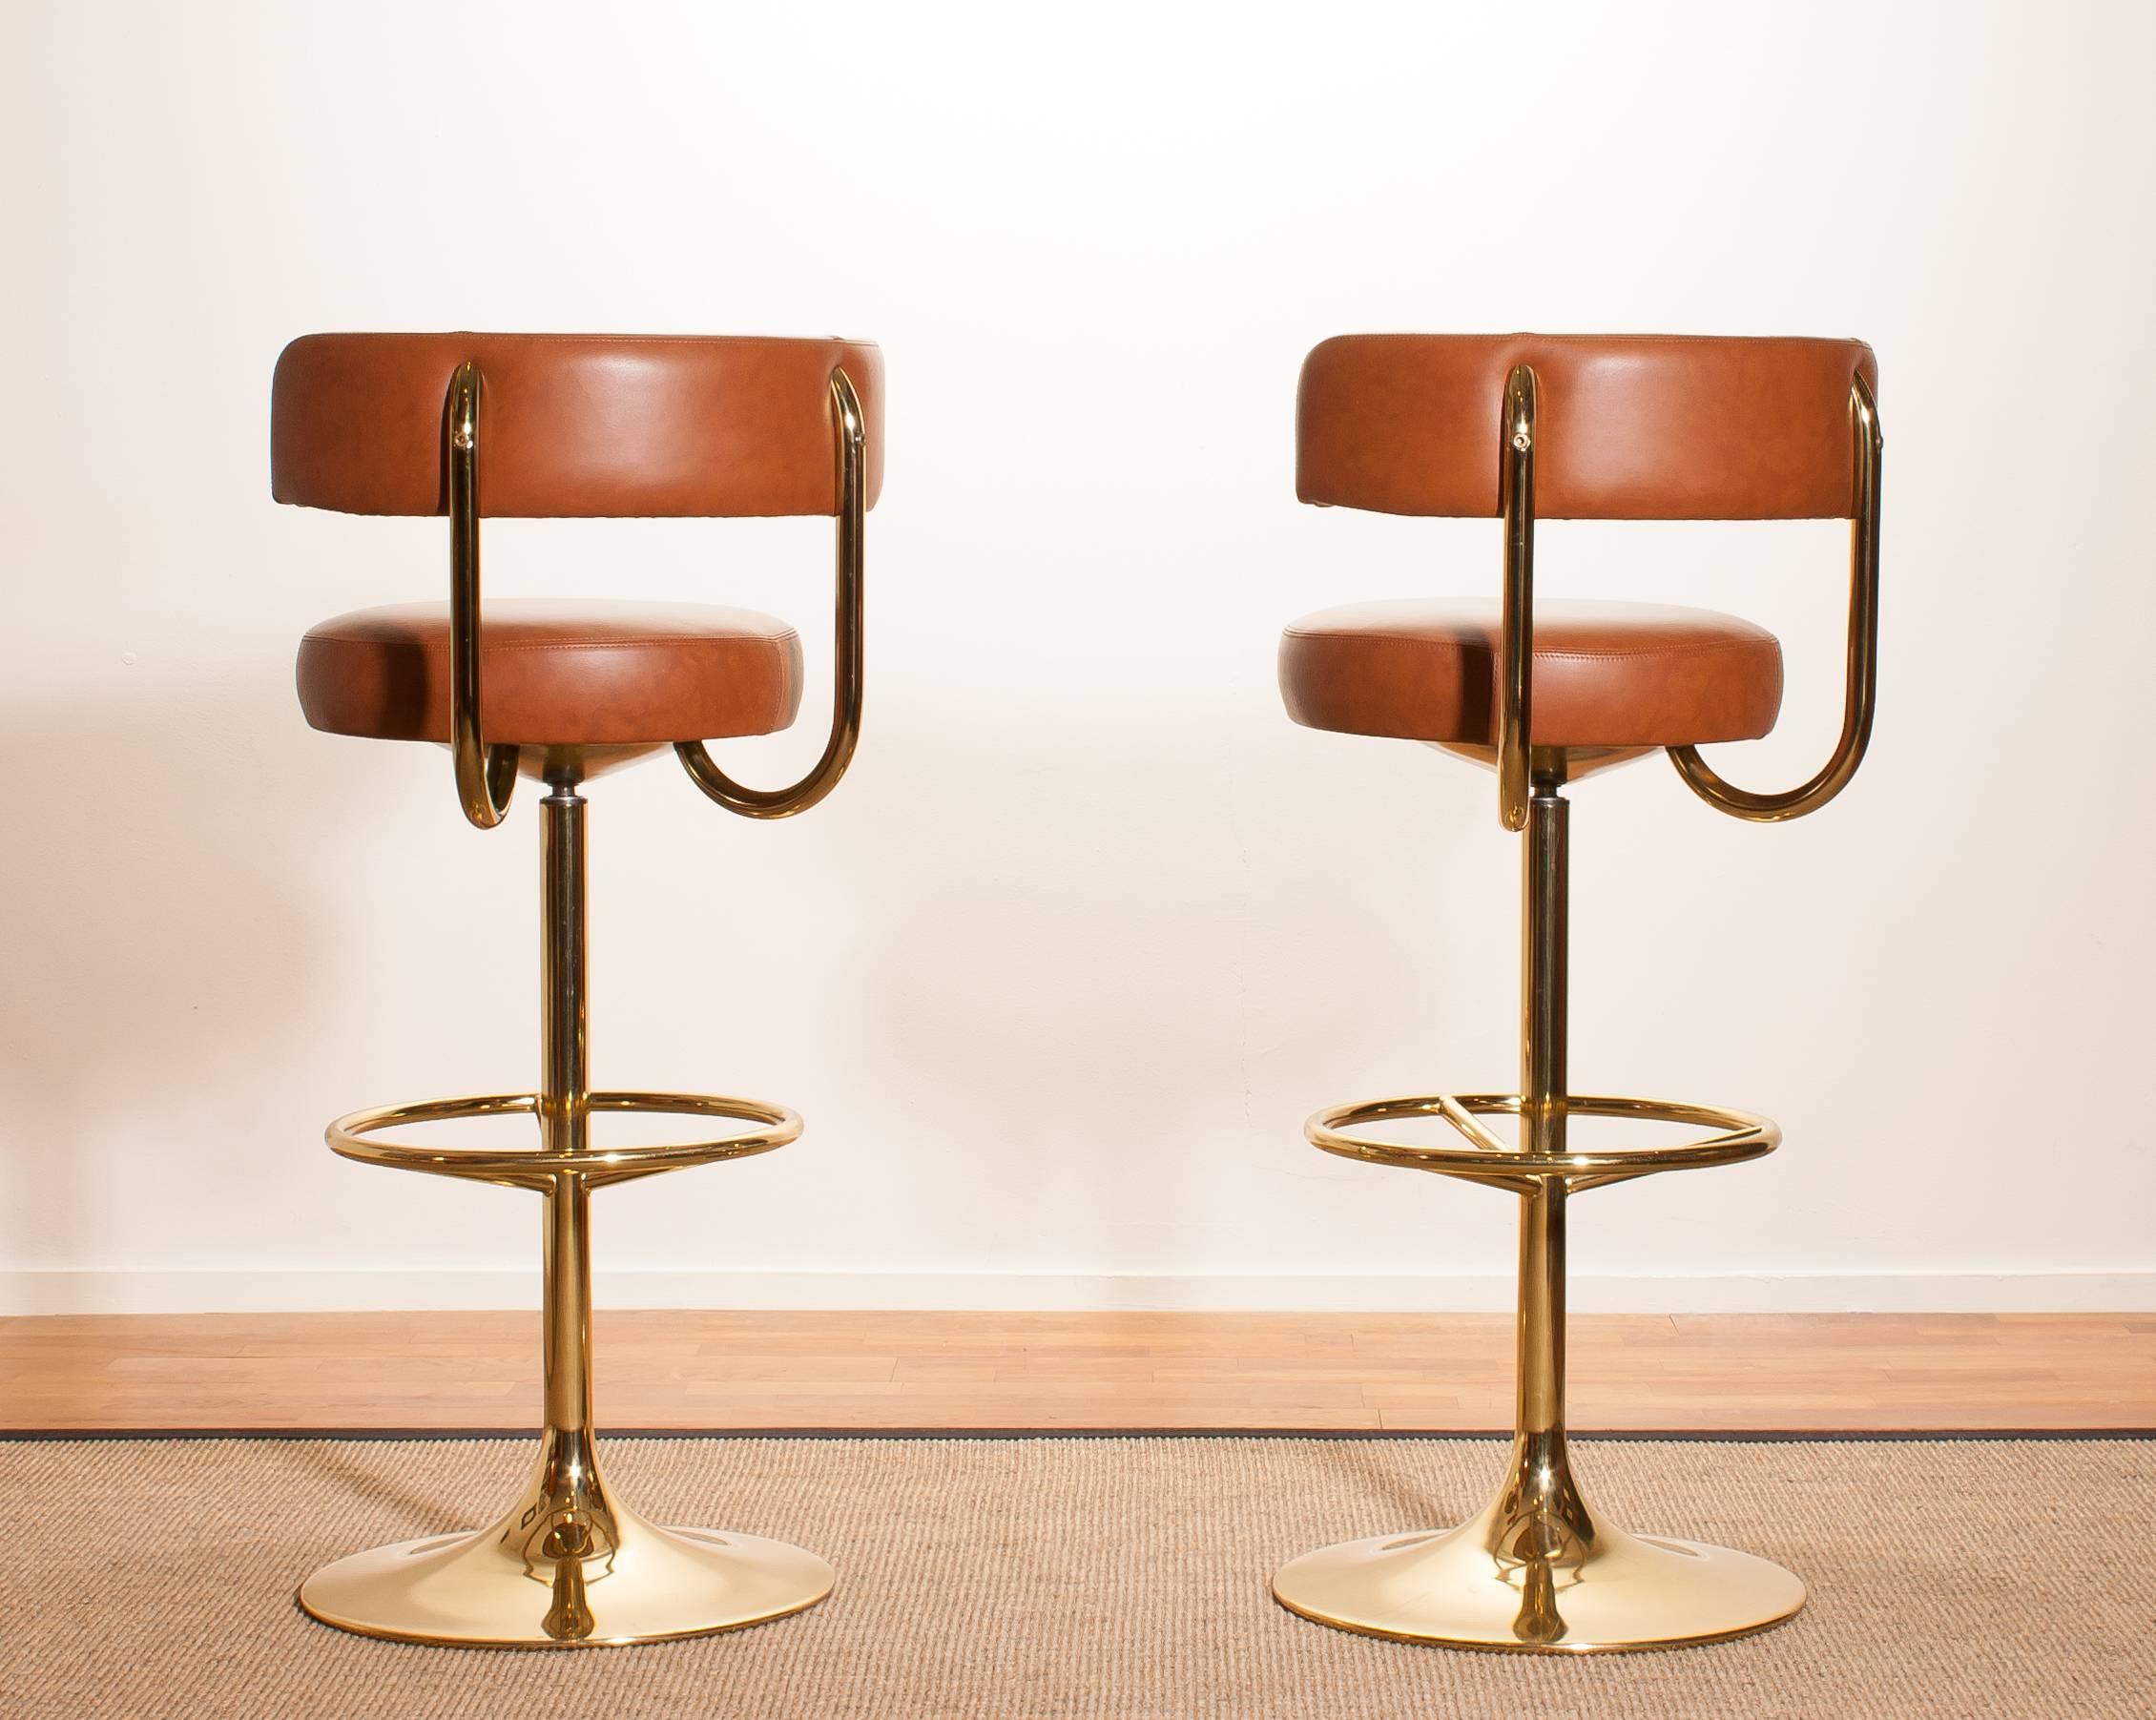 Late 20th Century 1970s, a Brass Set of Bar Stools and Bar Table by Börje Johanson